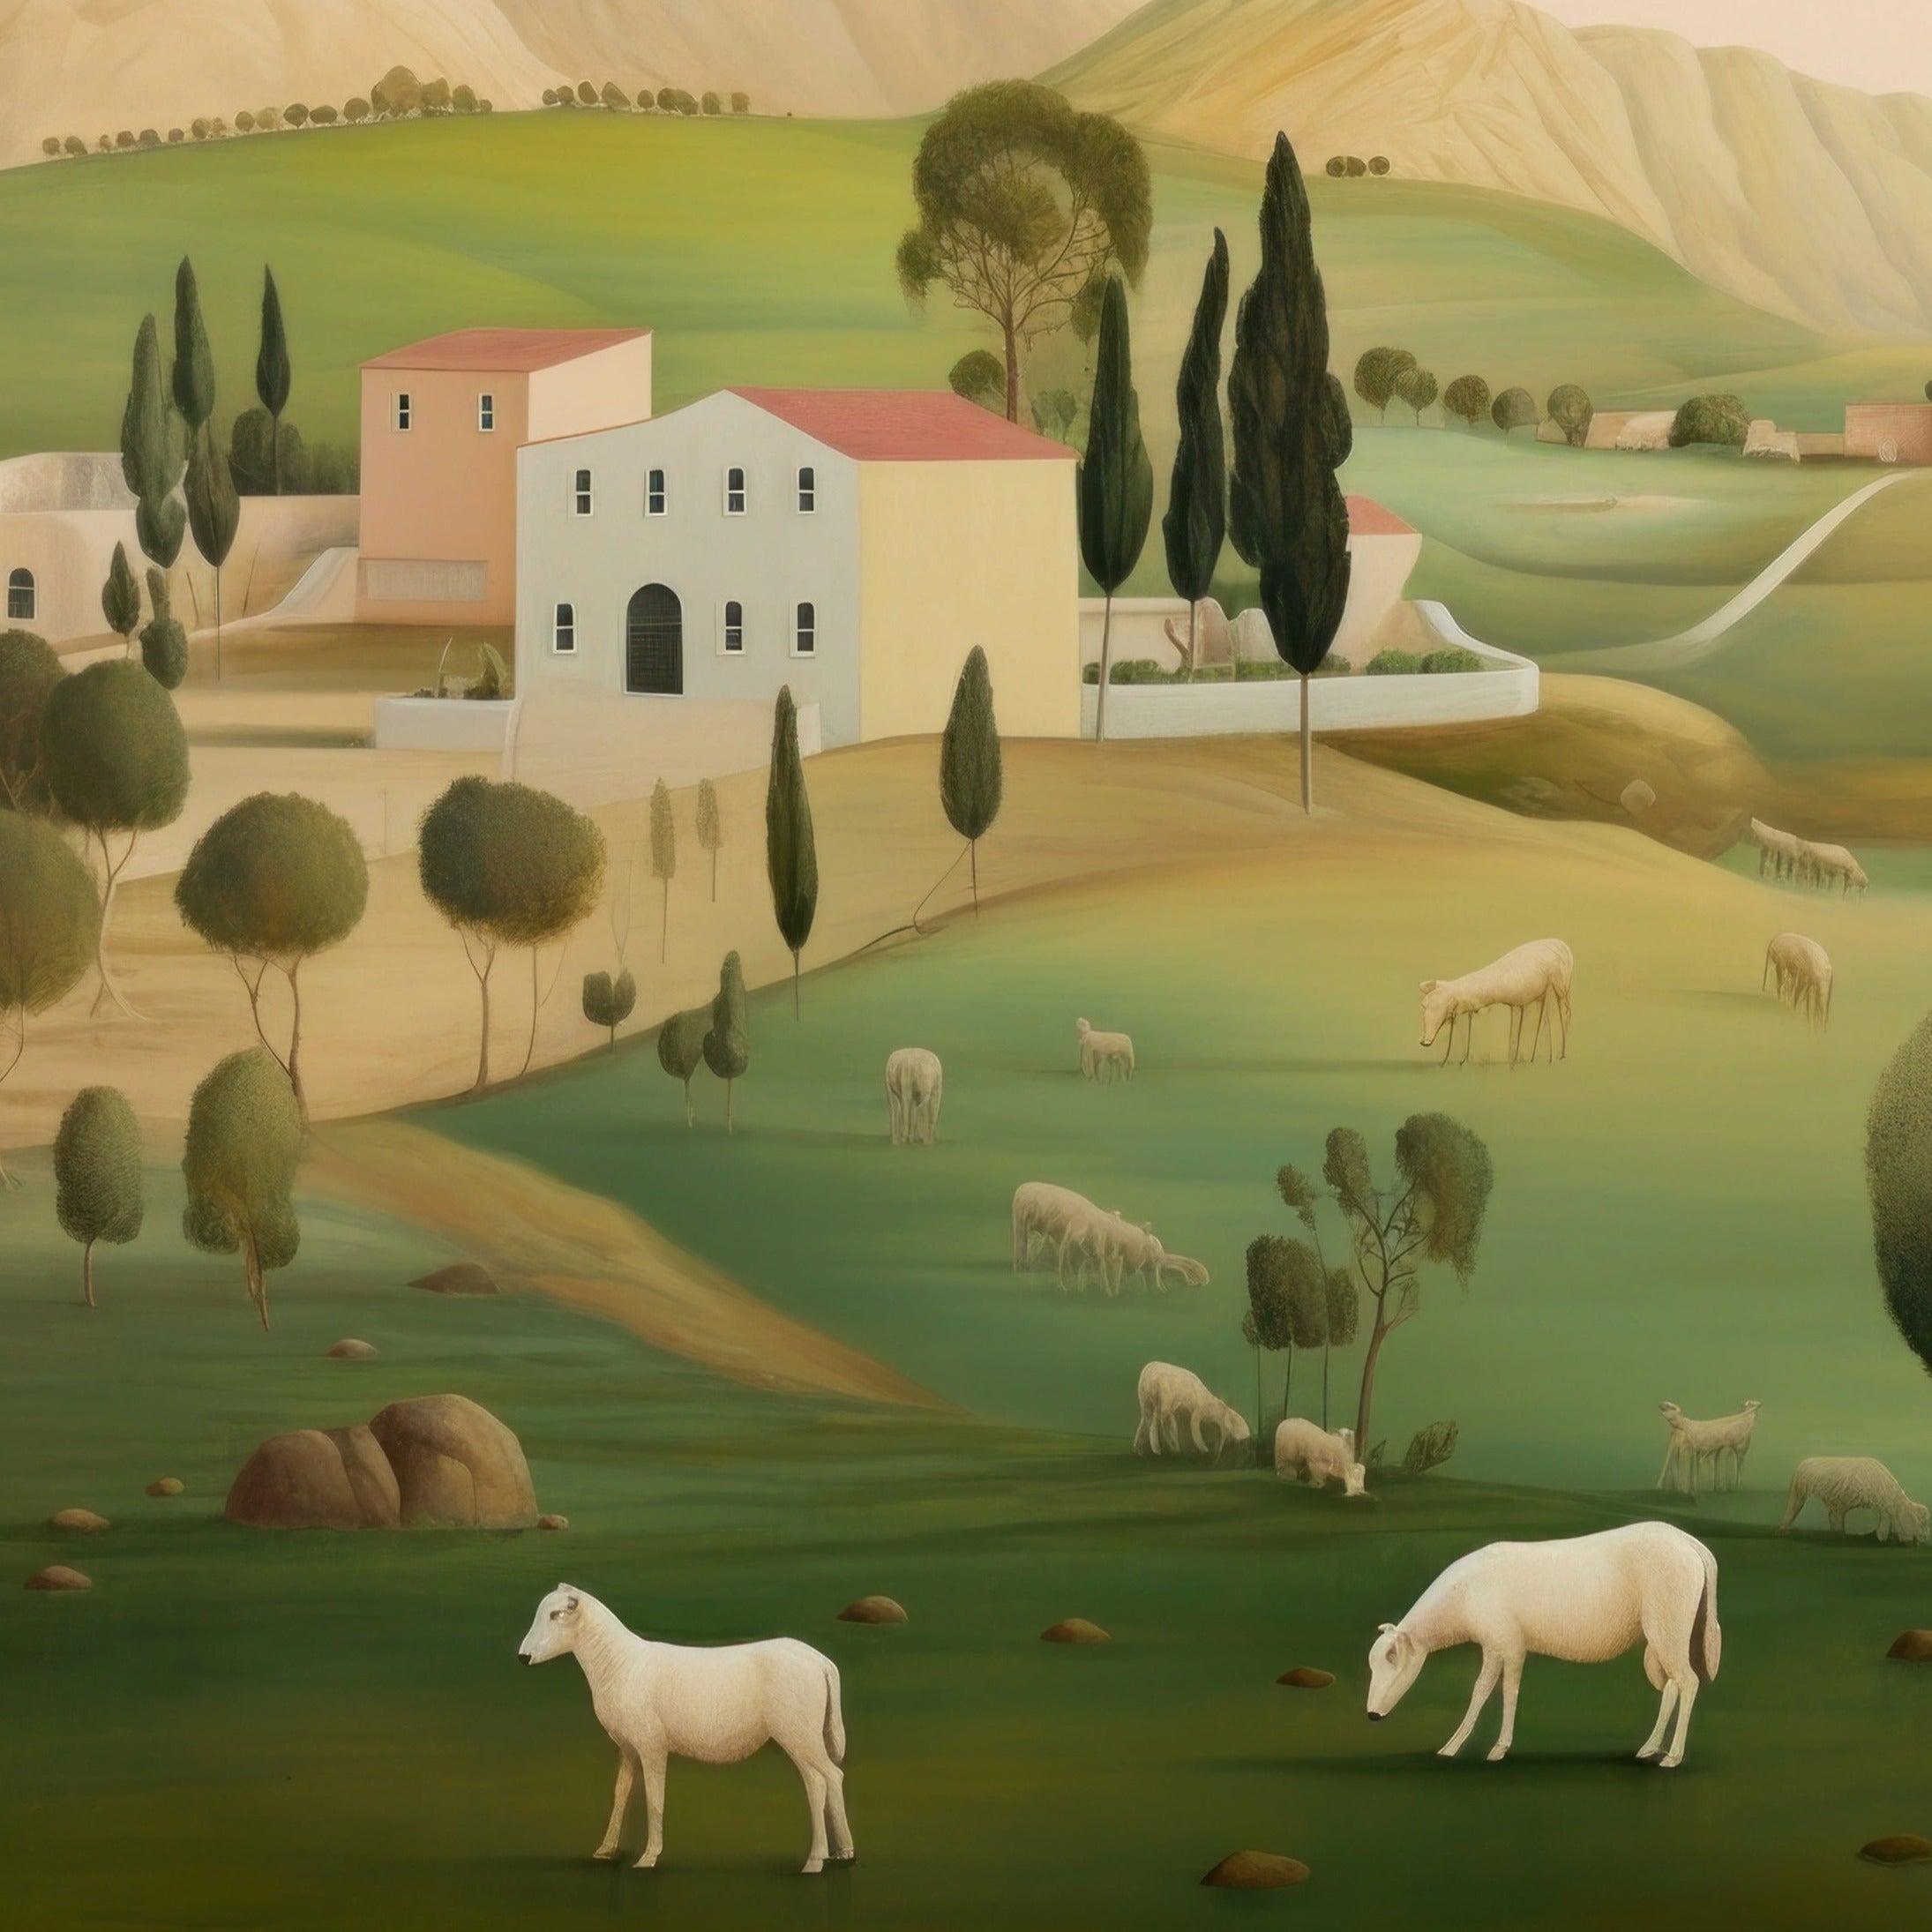 Panoramic view of a pastoral landscape mural depicting rolling hills, traditional houses, and grazing sheep in a serene countryside setting.